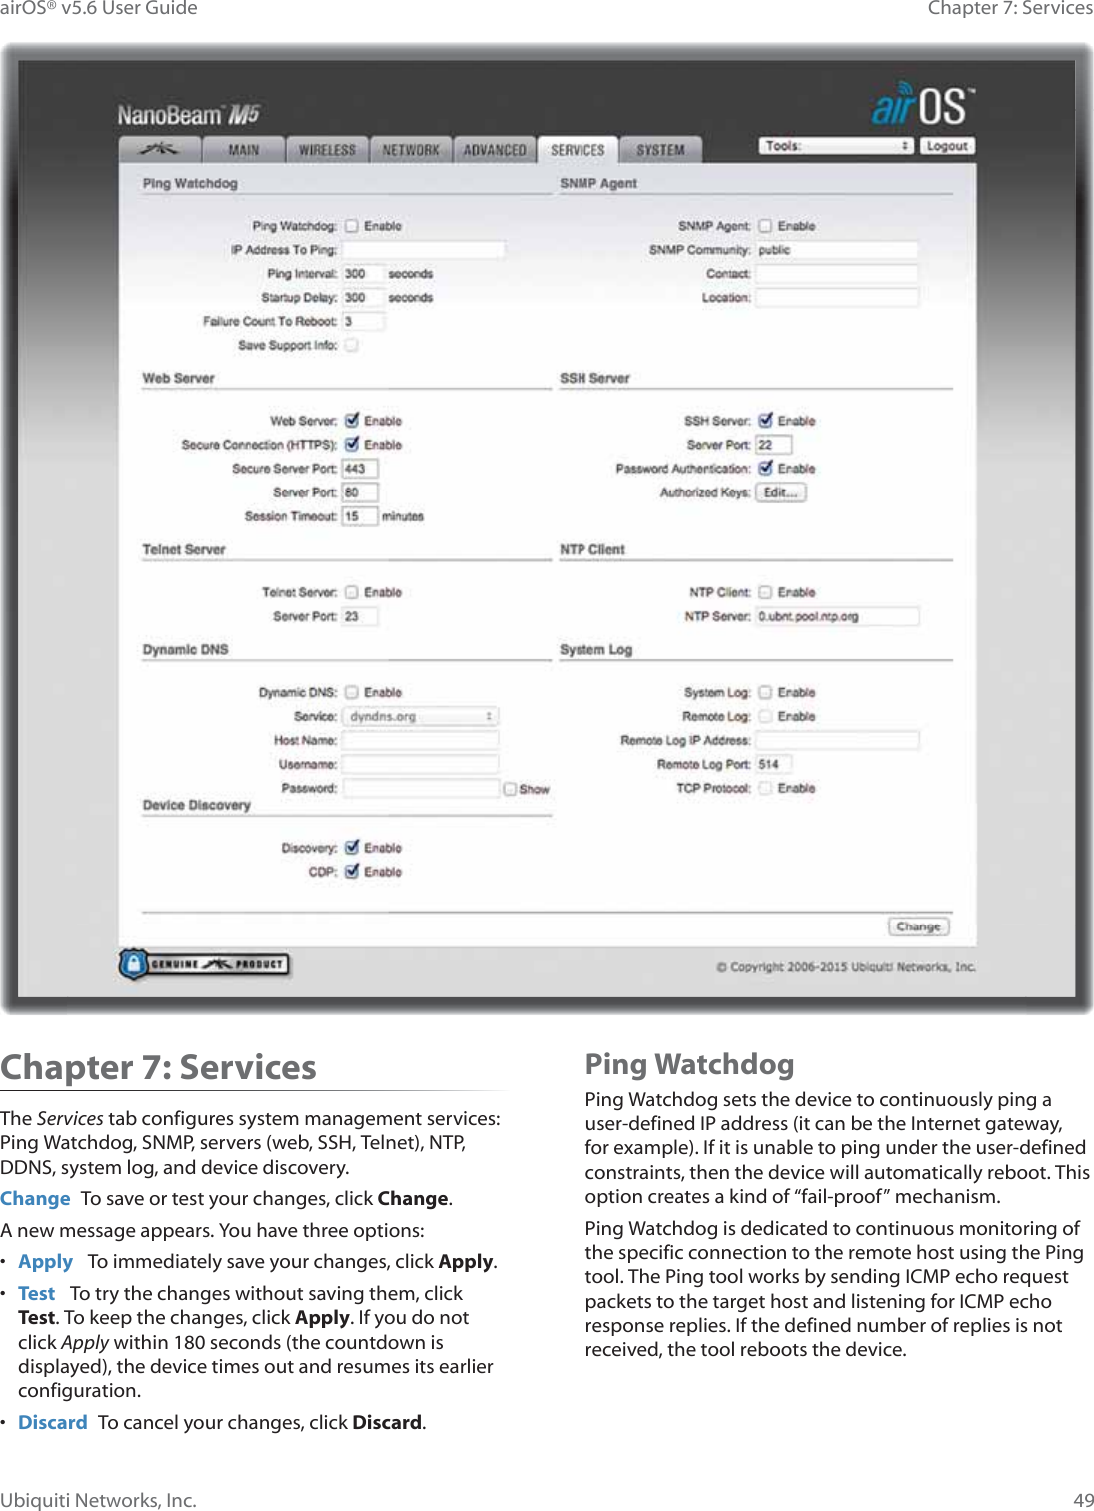 49Chapter 7: Services airOS® v5.6 User GuideUbiquiti Networks, Inc.Chapter 7: Services The Services tab configures system management services: Ping Watchdog, SNMP, servers (web, SSH, Telnet), NTP, DDNS, system log, and device discovery.Change  To save or test your changes, click Change.A new message appears. You have three options:•  Apply   To immediately save your changes, click Apply.•  Test   To try the changes without saving them, click Test. To keep the changes, click Apply. If you do not click Apply within 180 seconds (the countdown is displayed), the device times out and resumes its earlier configuration.•  Discard  To cancel your changes, click Discard.Ping WatchdogPing Watchdog sets the device to continuously ping a user-defined IP address (it can be the Internet gateway, for example). If it is unable to ping under the user-defined constraints, then the device will automatically reboot. This option creates a kind of “fail-proof” mechanism.Ping Watchdog is dedicated to continuous monitoring of the specific connection to the remote host using the Ping tool. The Ping tool works by sending ICMP echo request packets to the target host and listening for ICMP echo response replies. If the defined number of replies is not received, the tool reboots the device.